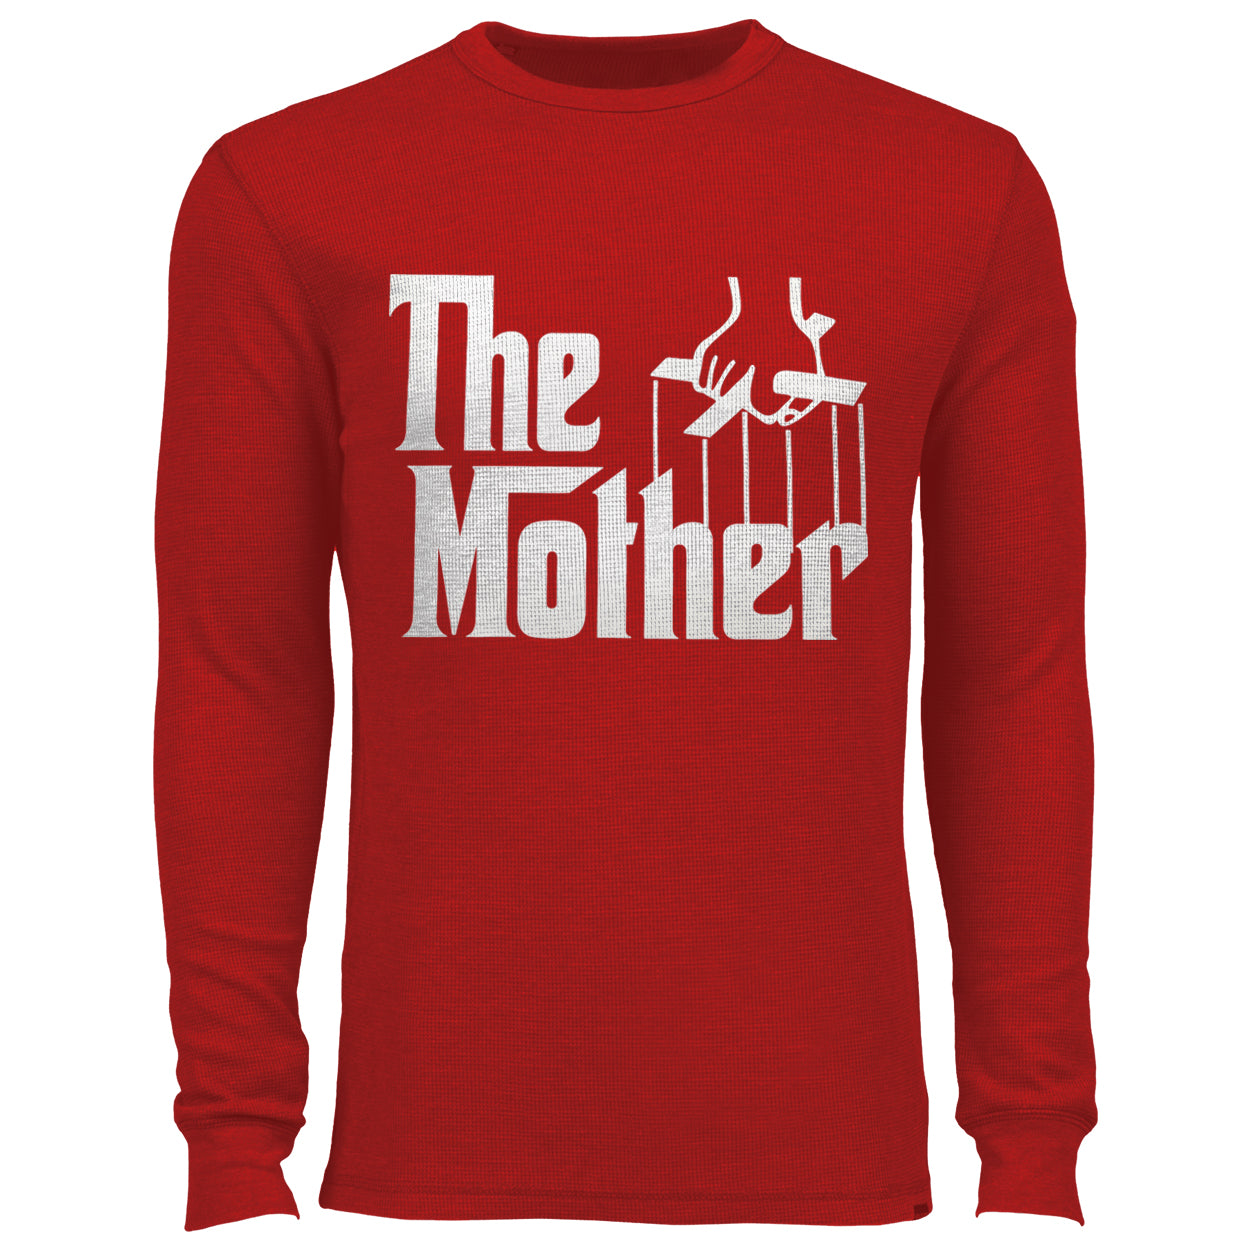 The Mother Funny Thermal Shirt